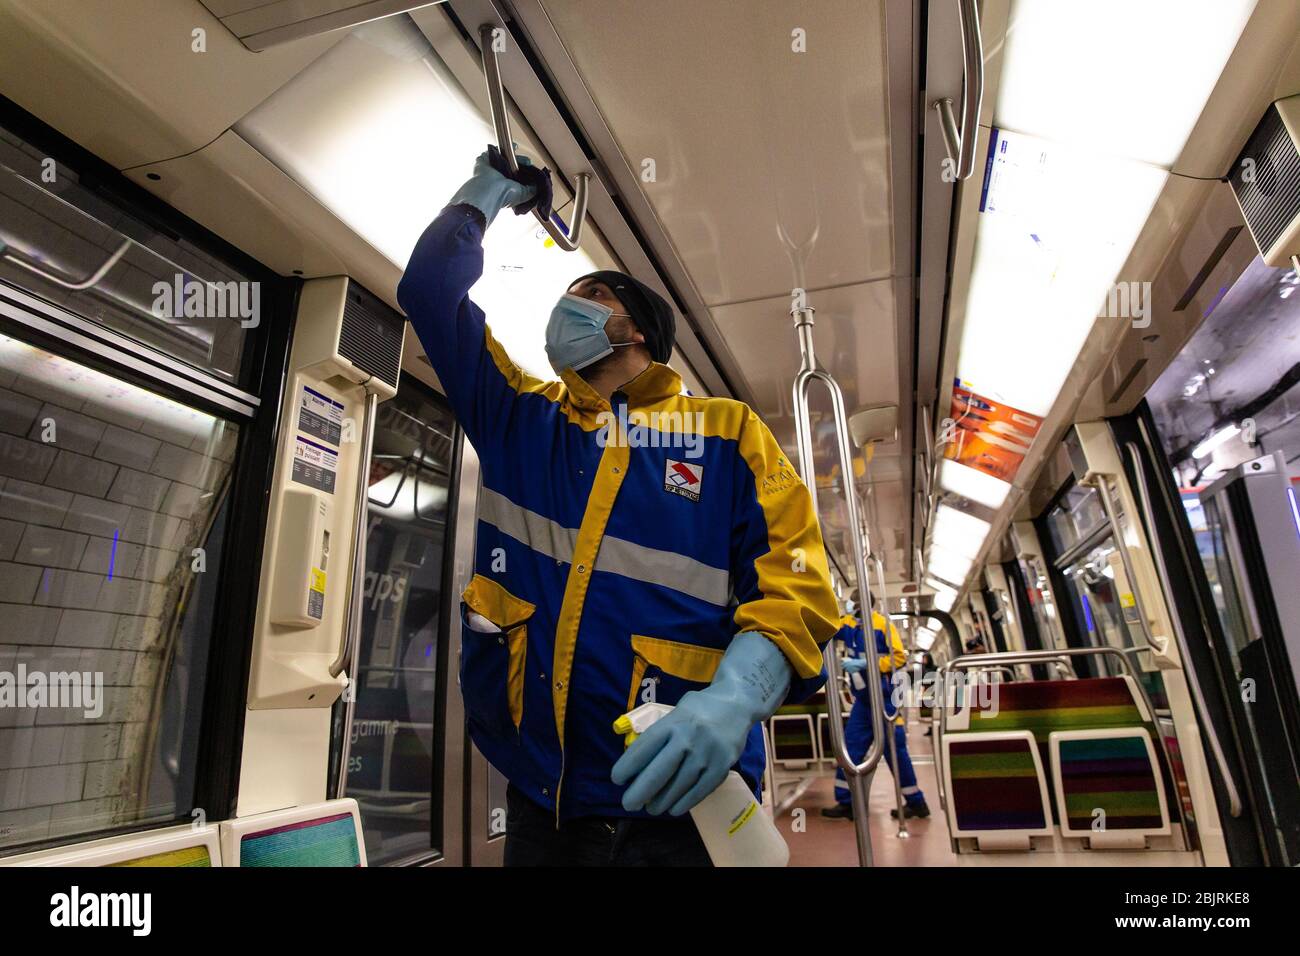 Paris, France. 30th Apr, 2020. Staff members of a private cleaning and disinfection company disinfect metro trains in Vincennes near Paris, France, April 30, 2020. Two weeks ahead of the exit plan being put into motion, France's coronavirus death toll rose to 24,087 while hospitalizations and patients in intensive care continued to decline on Wednesday. Credit: Aurelien Morissard/Xinhua/Alamy Live News Stock Photo